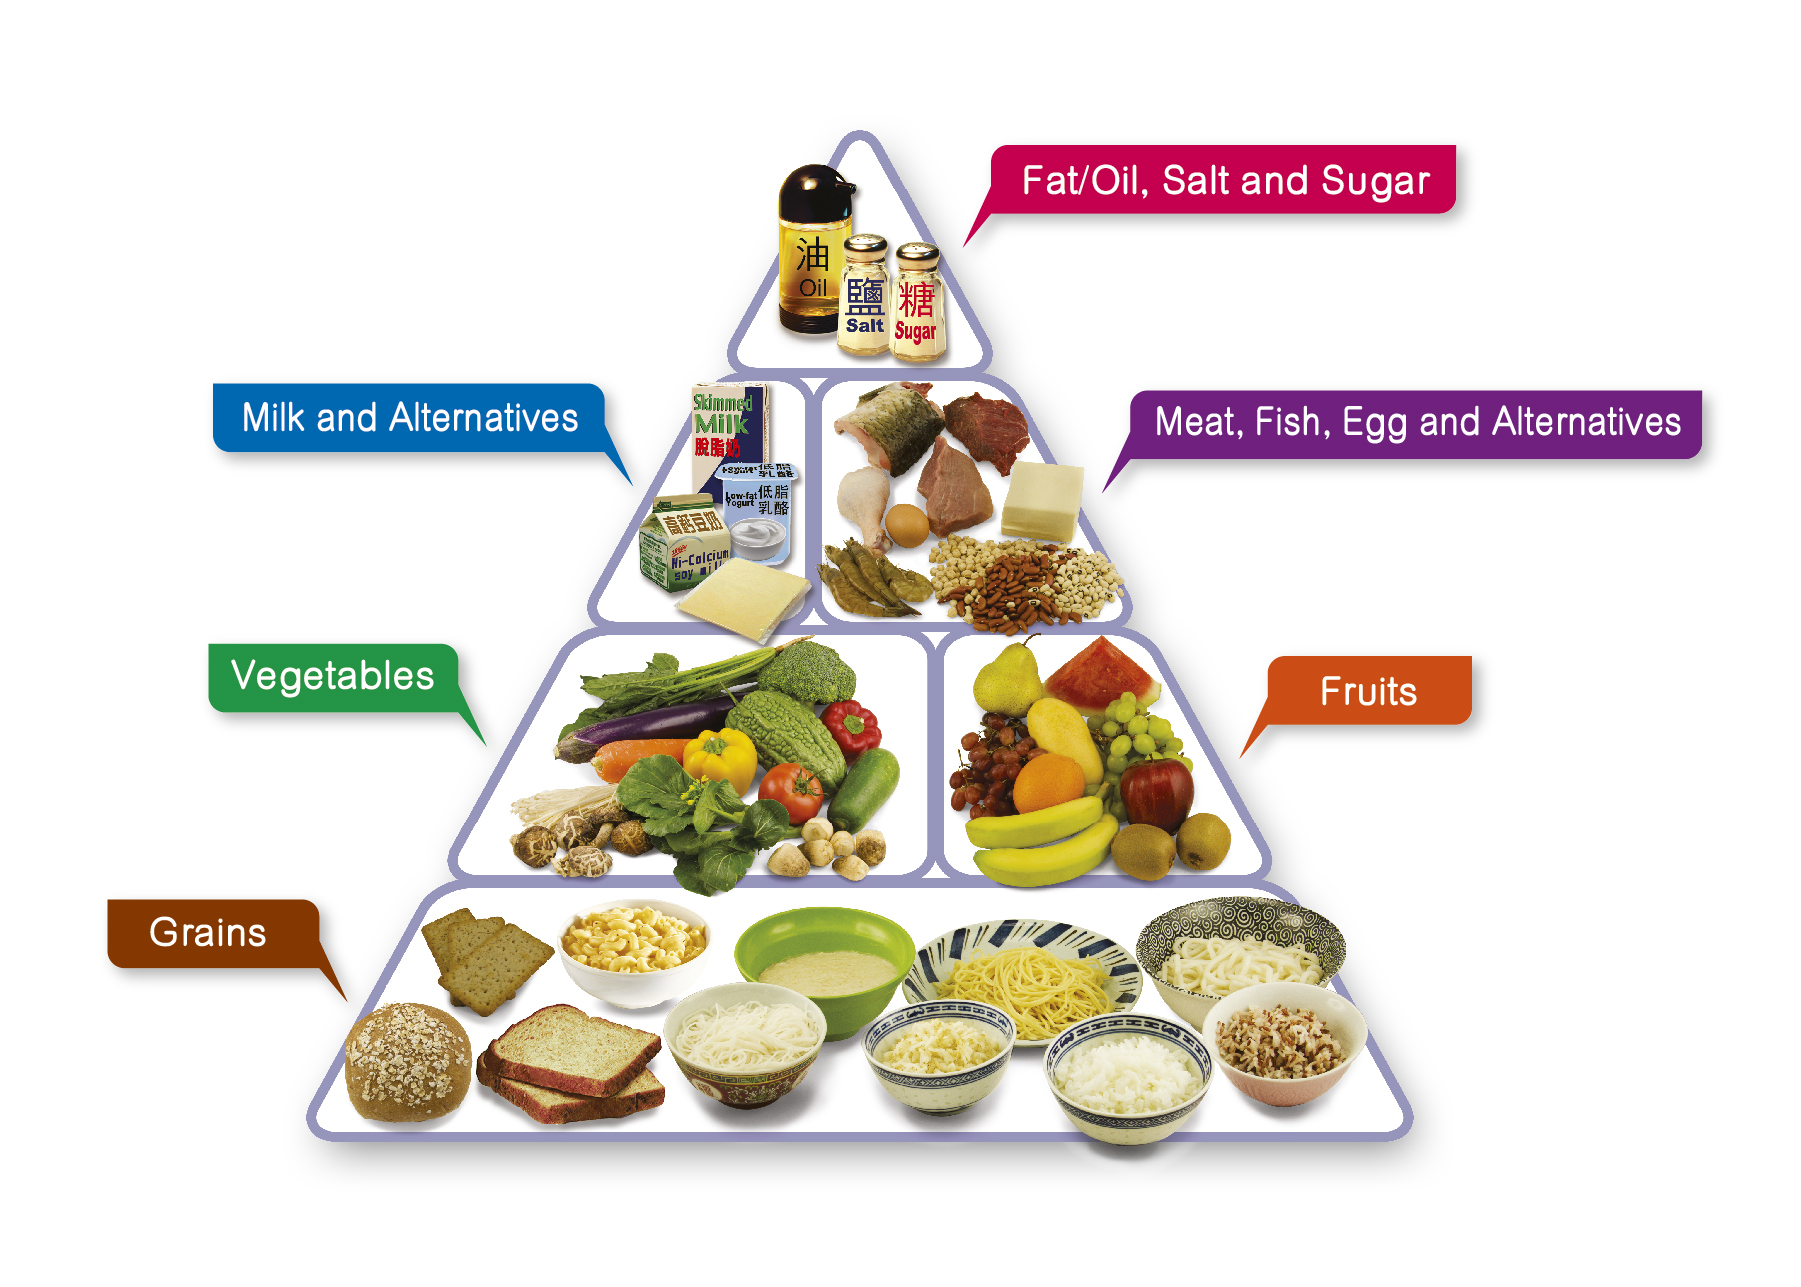 The Food Pyramid – A Guide to a Balanced Diet